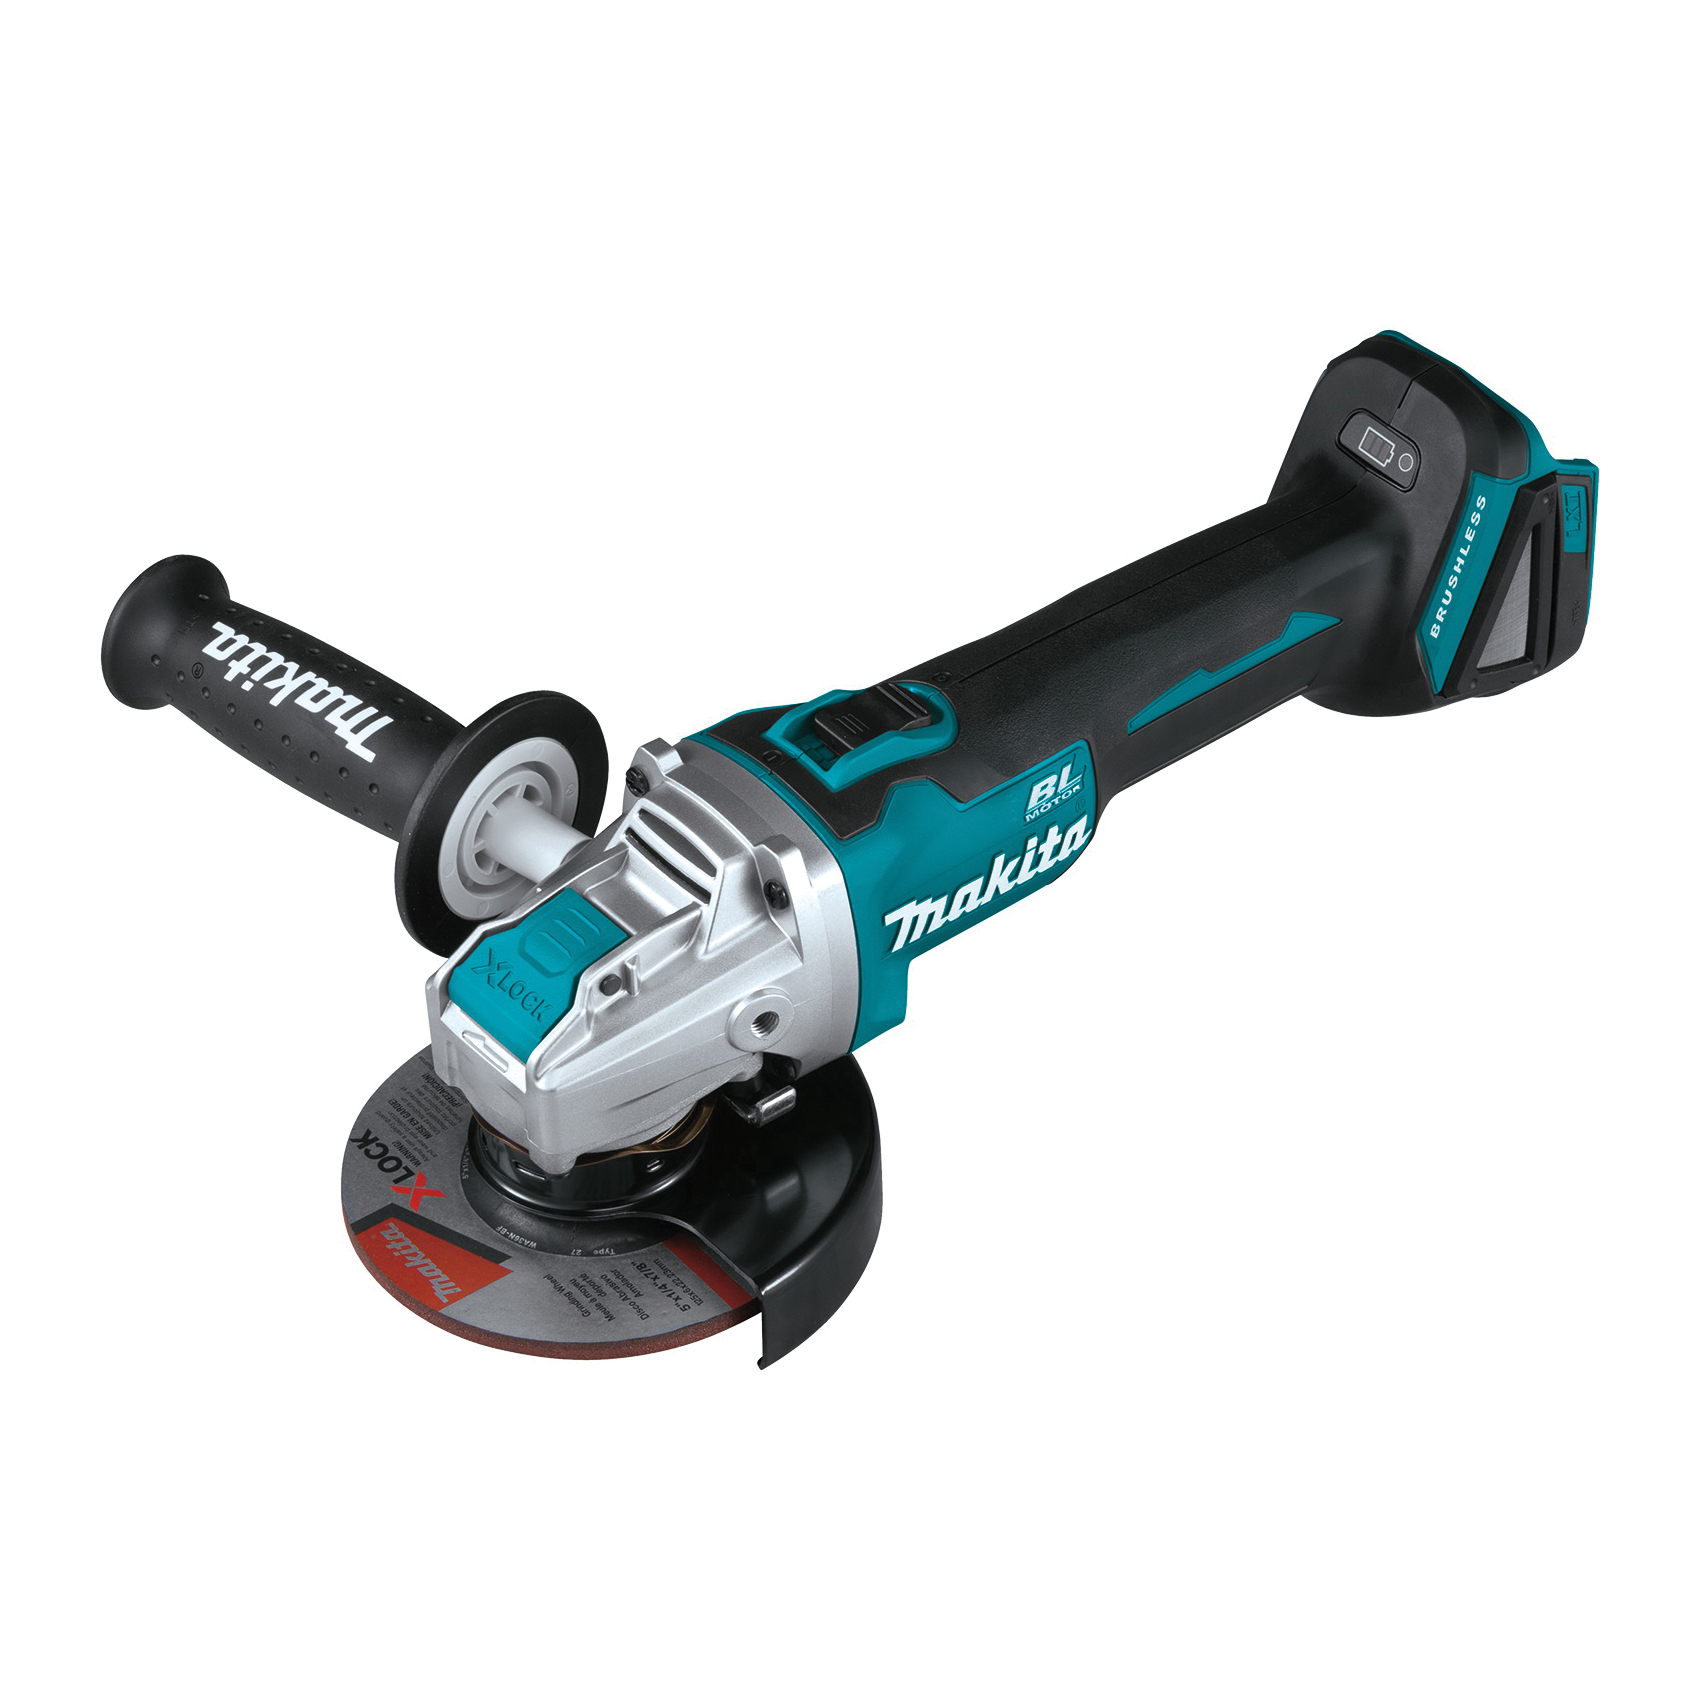 LXT XAG25Z Angle Grinder, Tool Only, 18 V, 5 Ah, 5 in Dia Wheel, 8500 rpm Speed